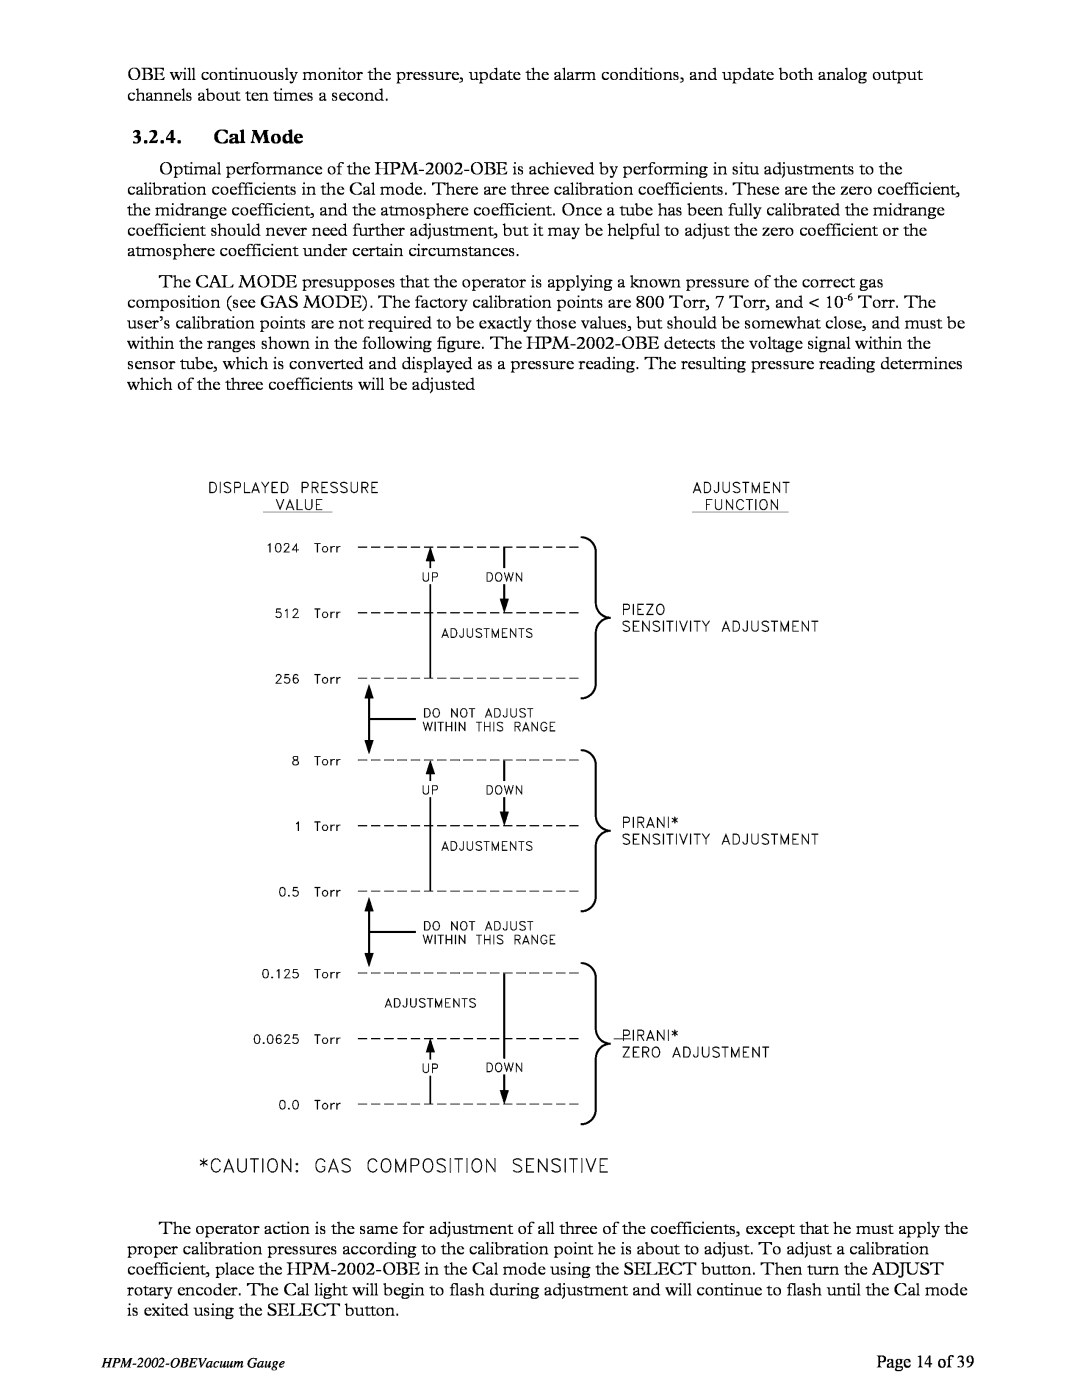 Teledyne HPM-2002-OBE instruction manual Cal Mode, Page 14 of 